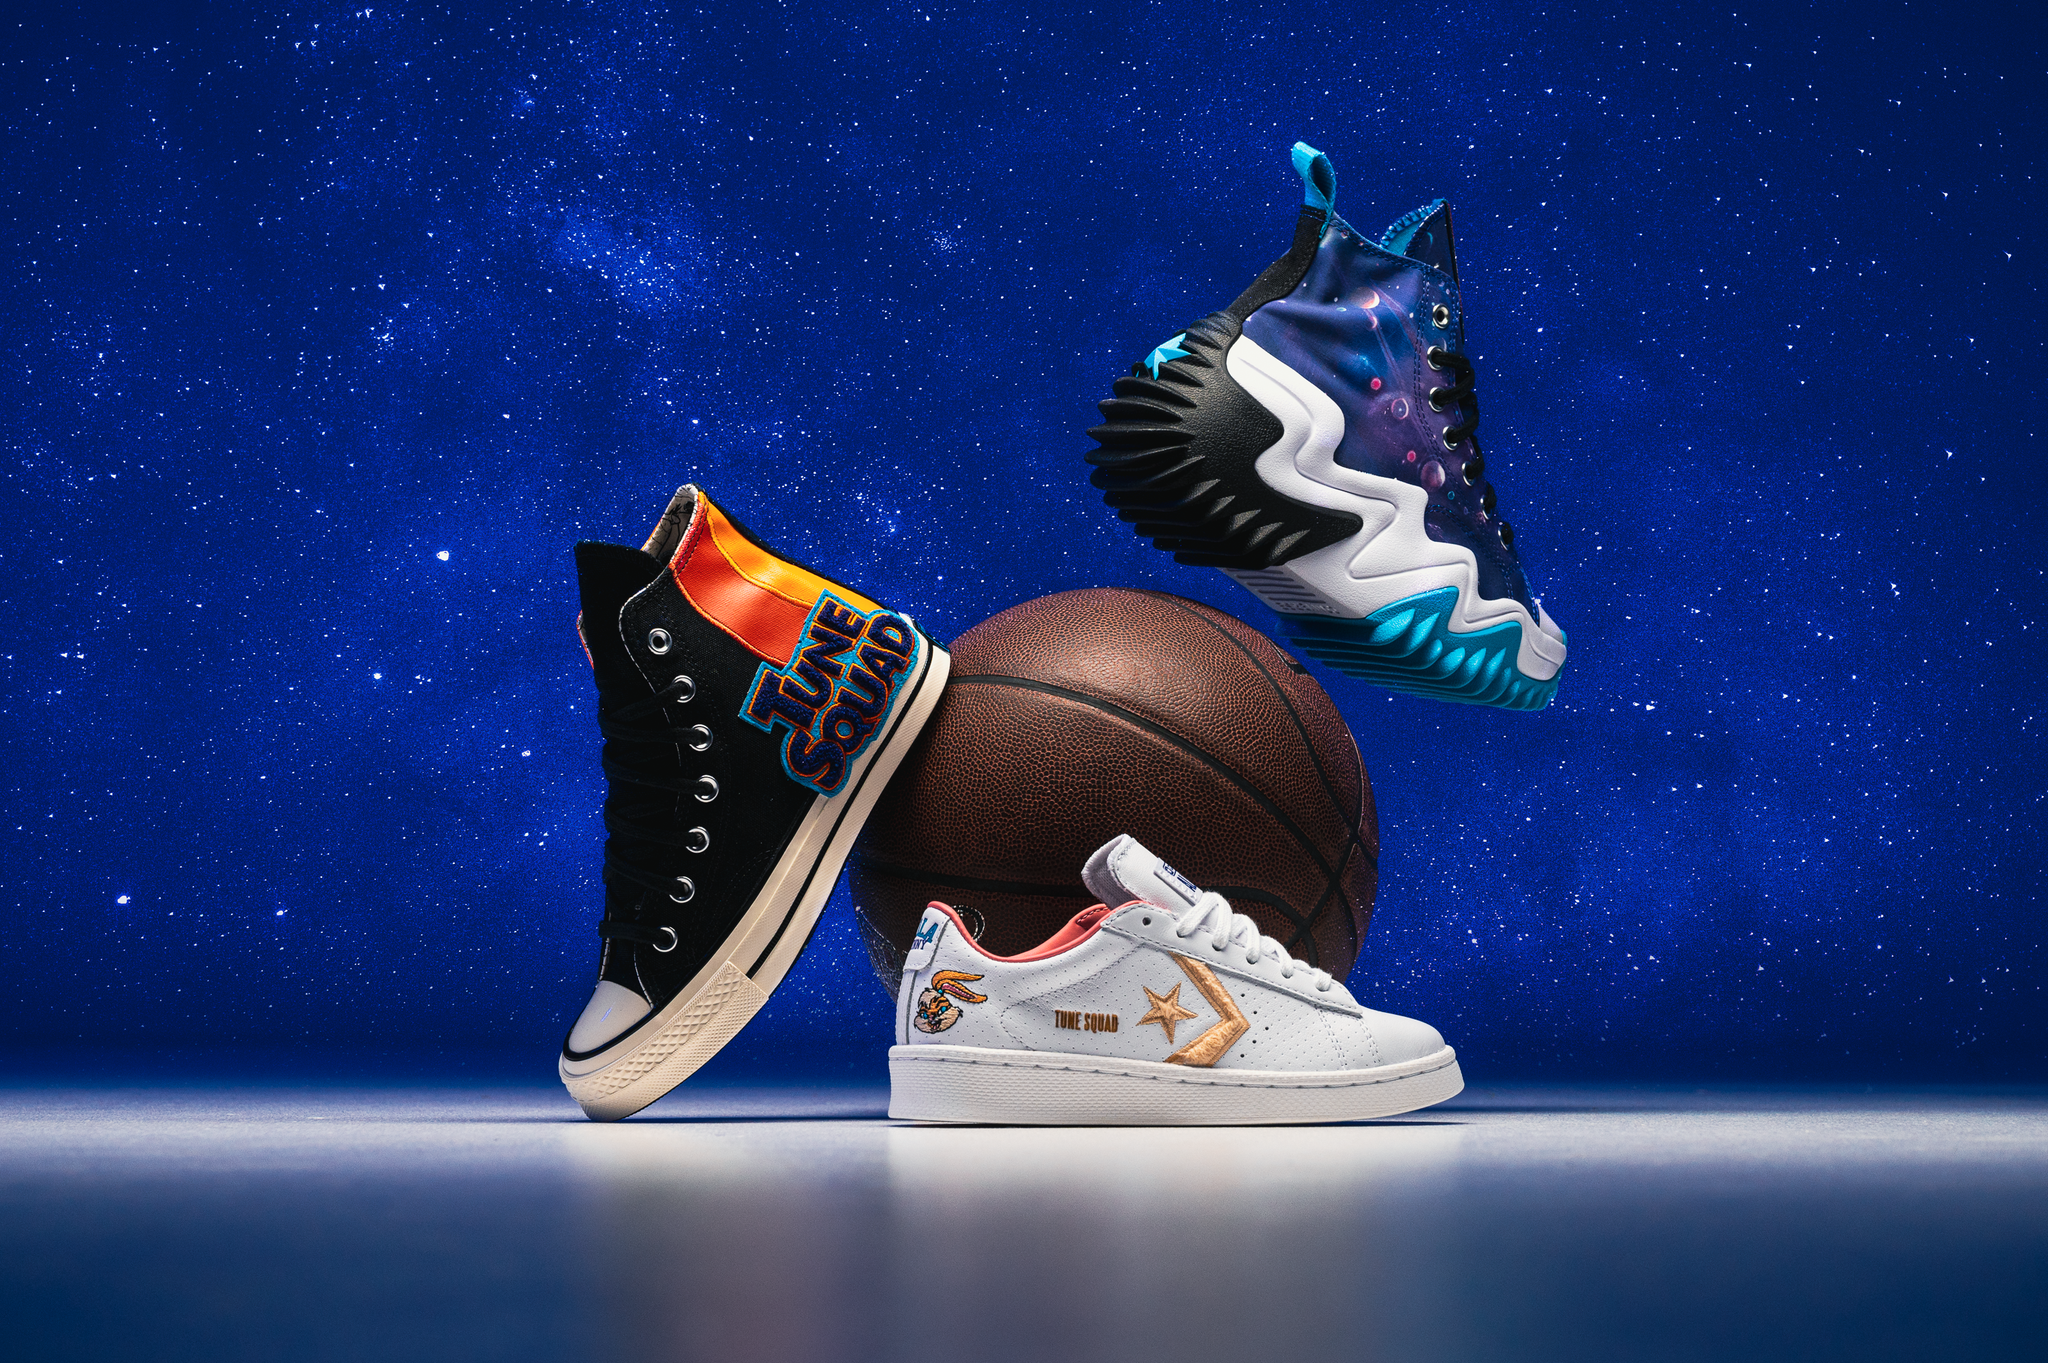 Play with LeBron James in Nike and Converse's new Space Jam collection